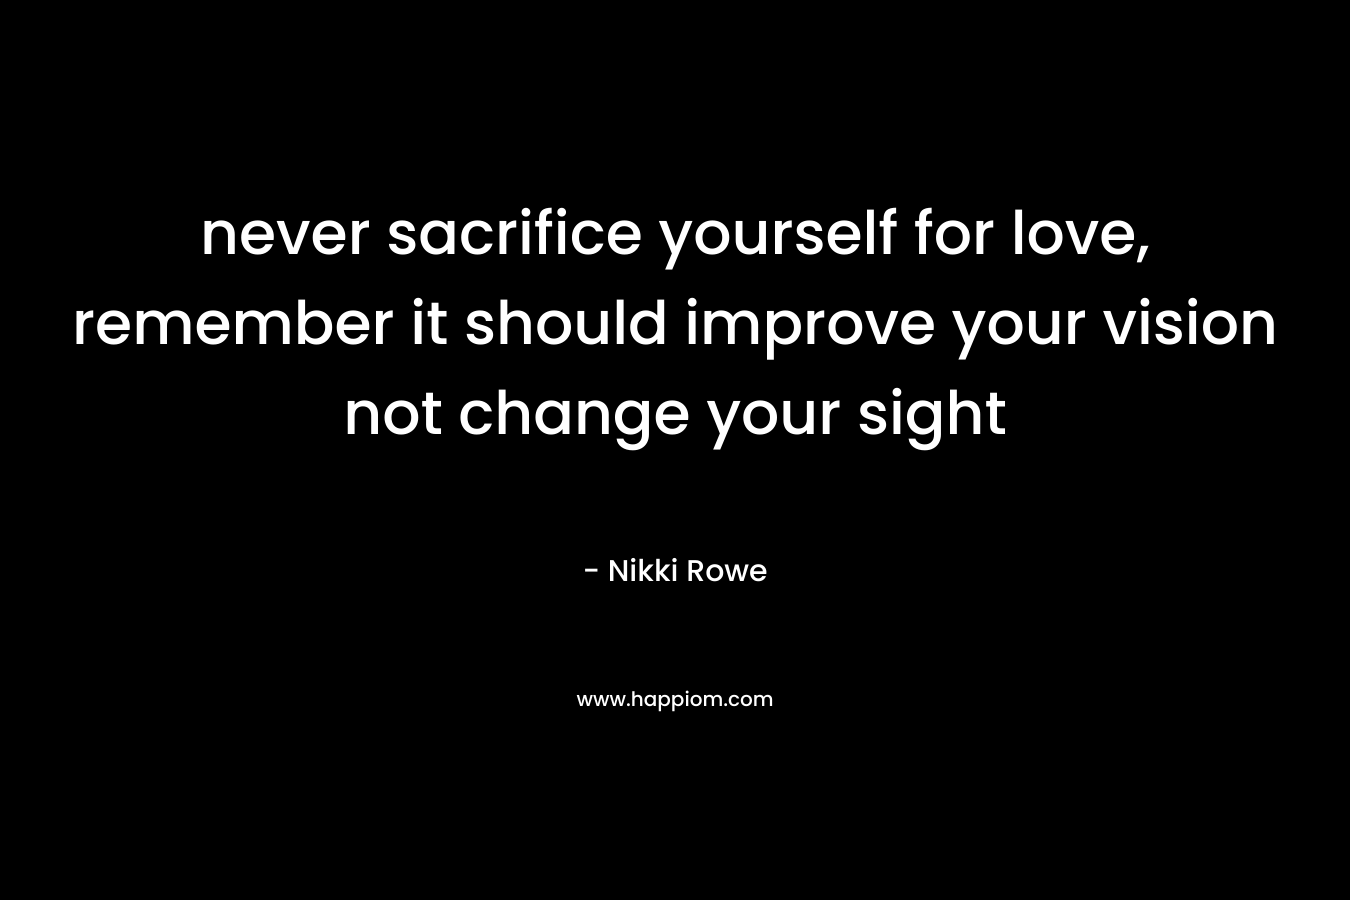 never sacrifice yourself for love, remember it should improve your vision not change your sight